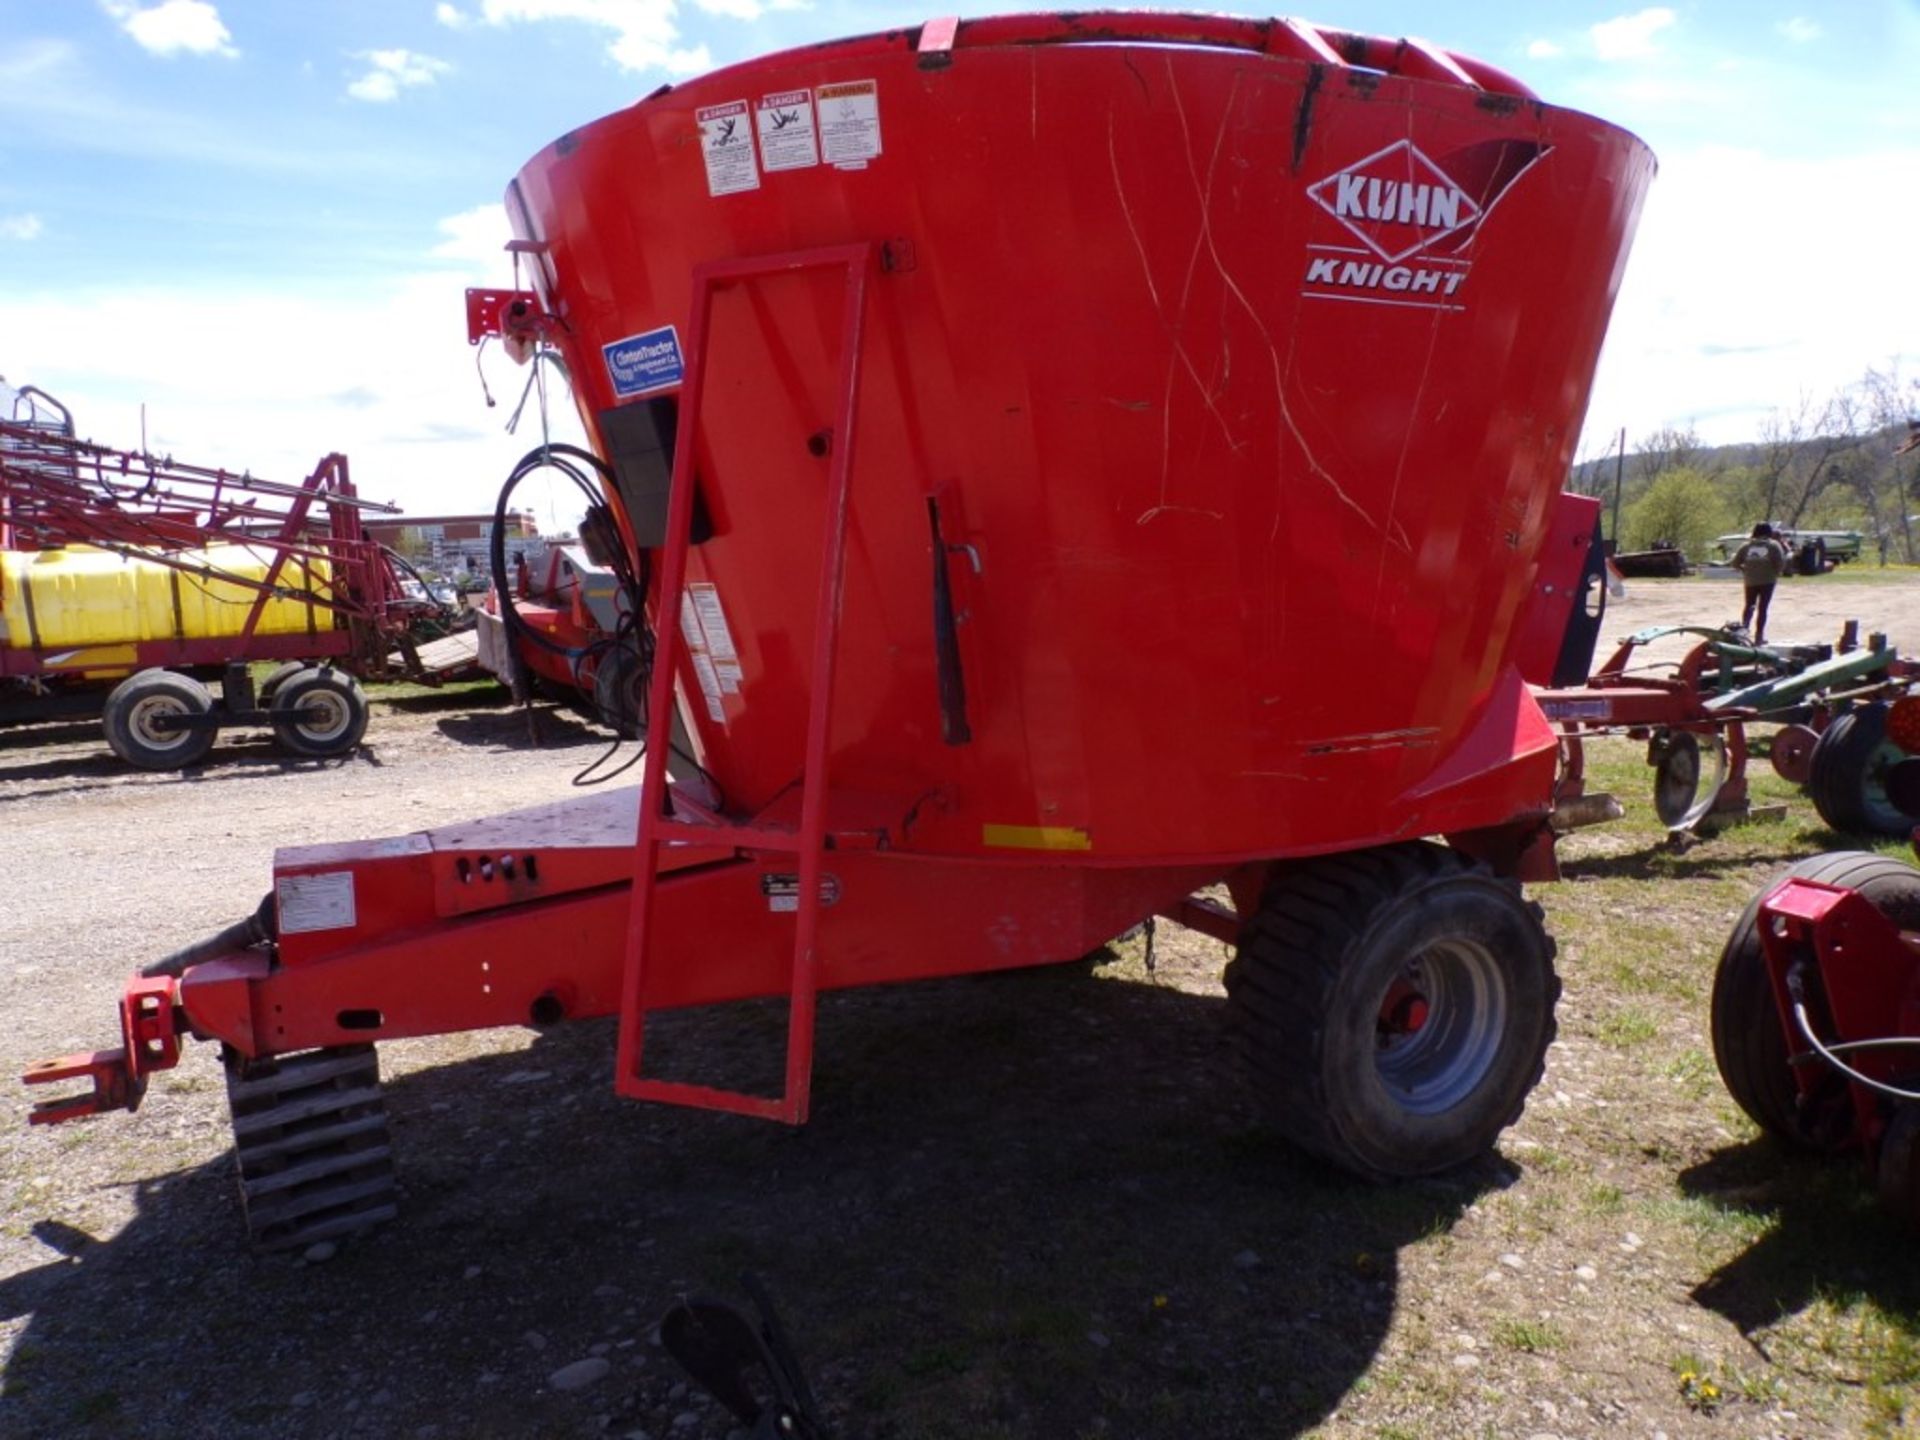 Kuhn 5127 Vertical Mixing/Feeder Wagon - Like New, Never Came w/Scales - Super Nice! (4395) - Image 2 of 3